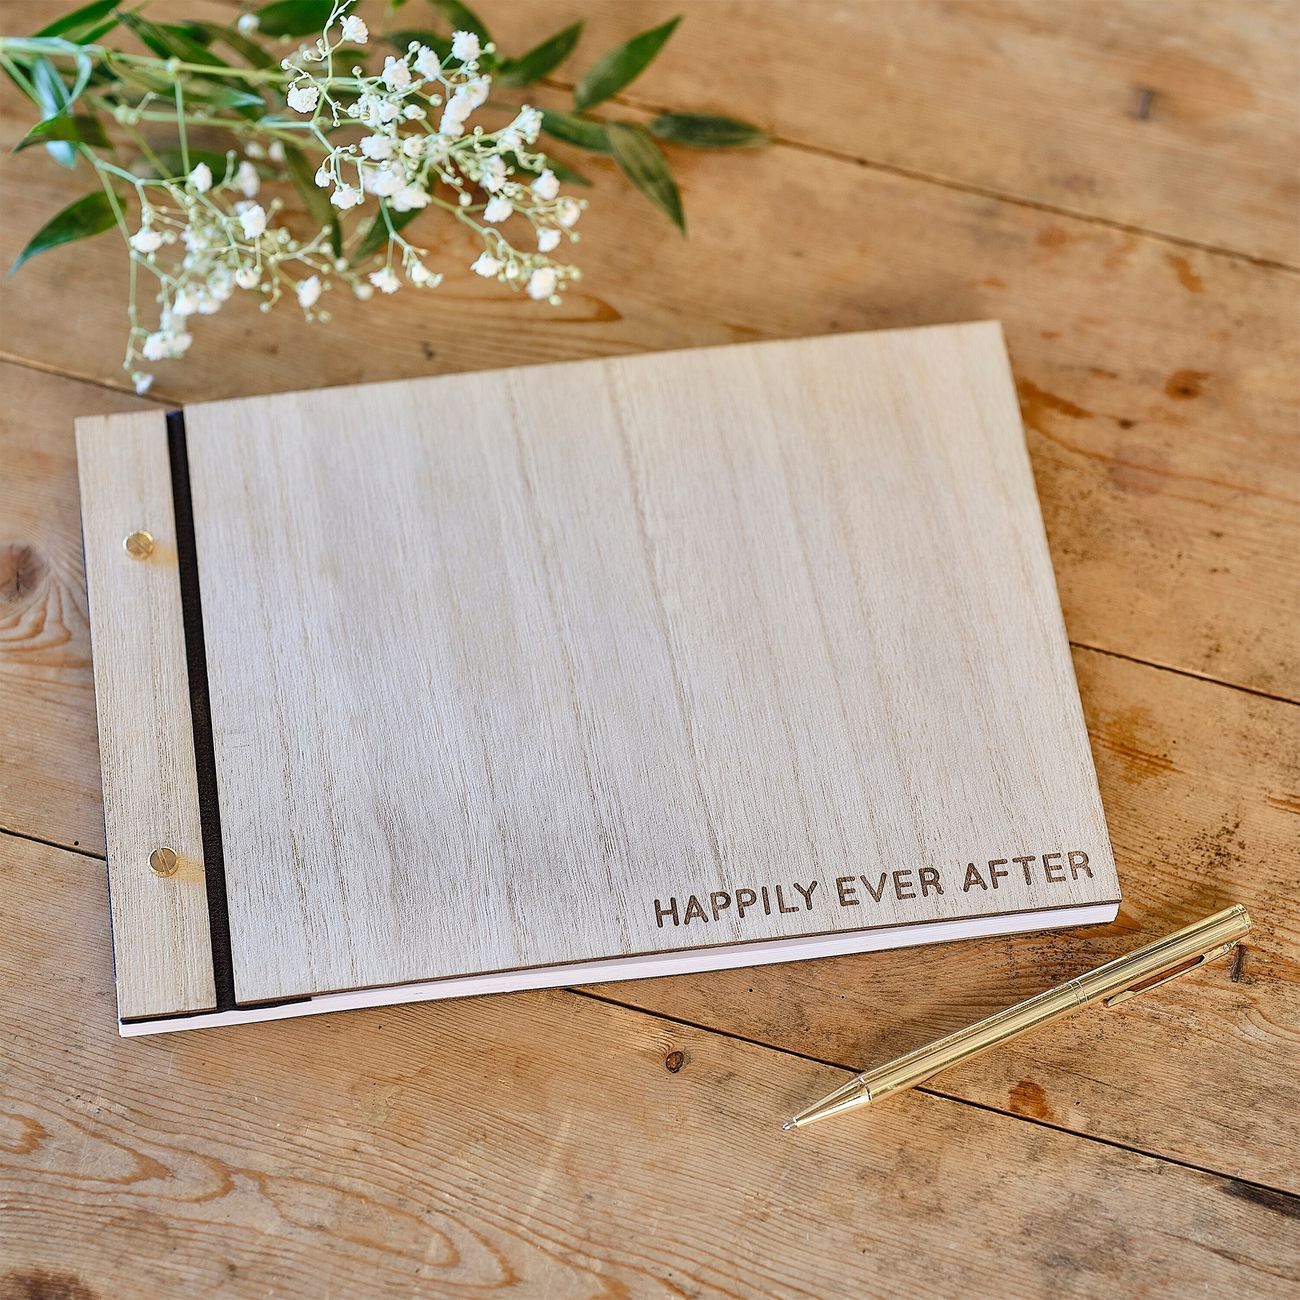 gastbok-i-tra-happily-ever-after-101792-2